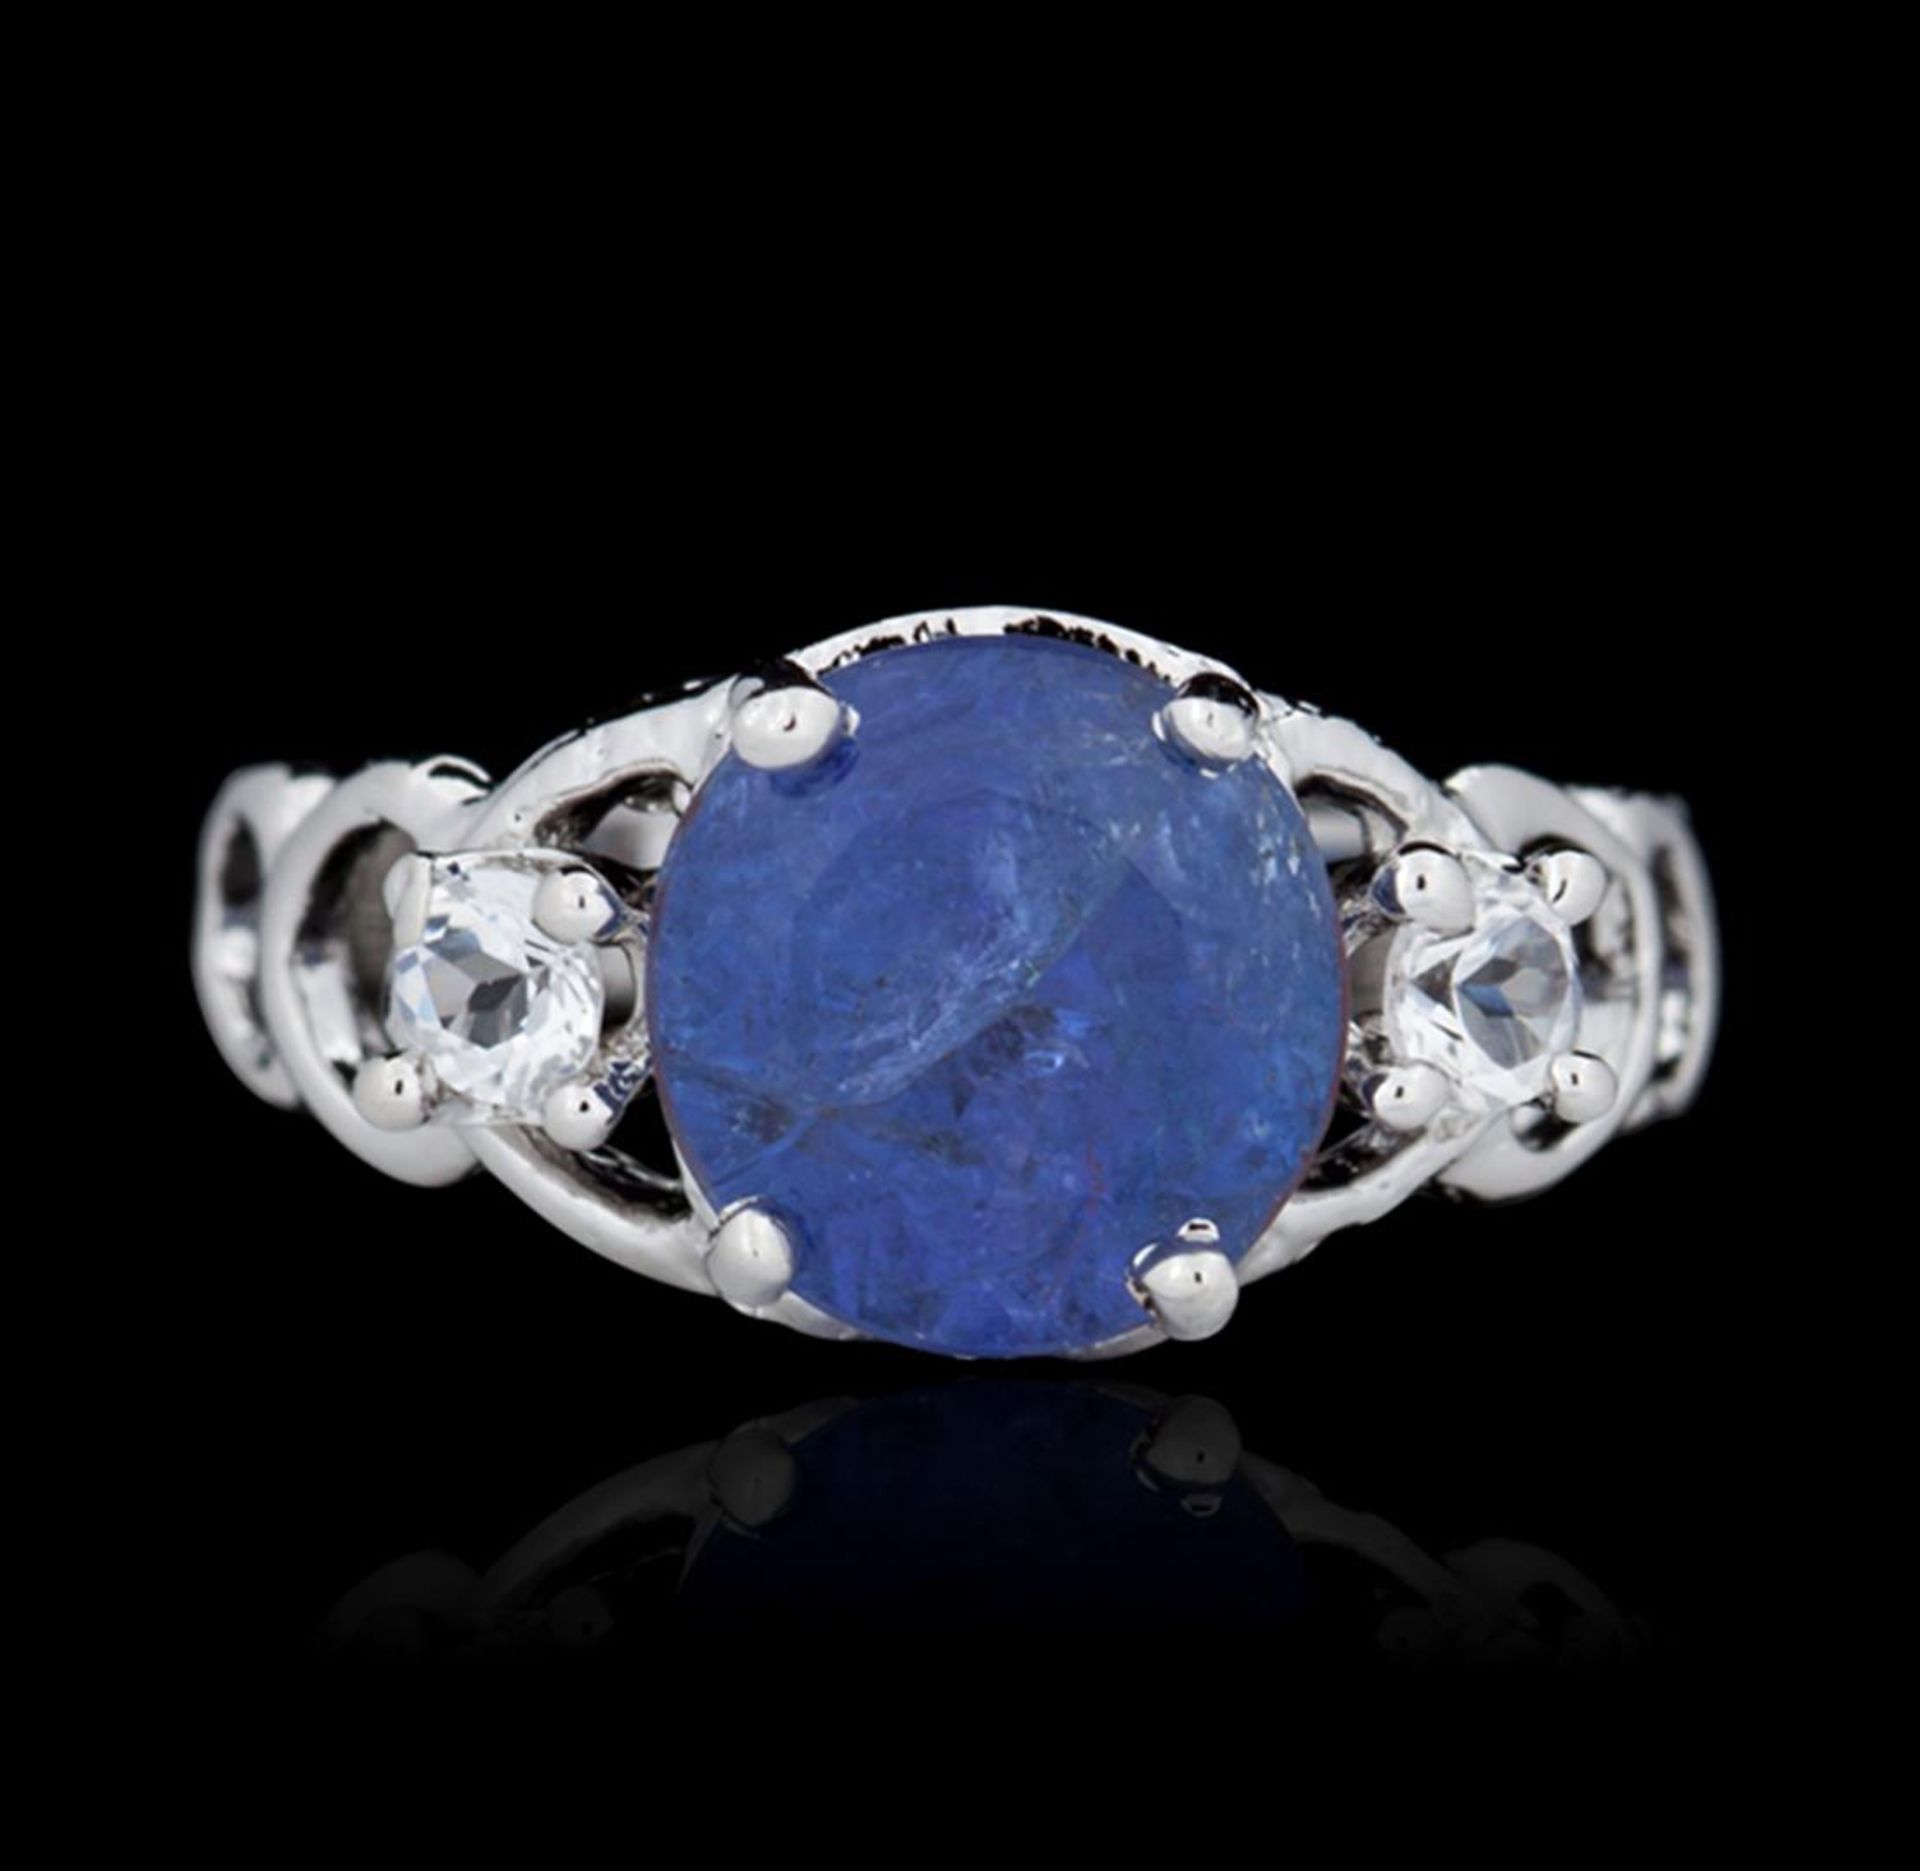 SILVER 2.90 ctw Tanzanite and White Topaz Ring - Image 2 of 2